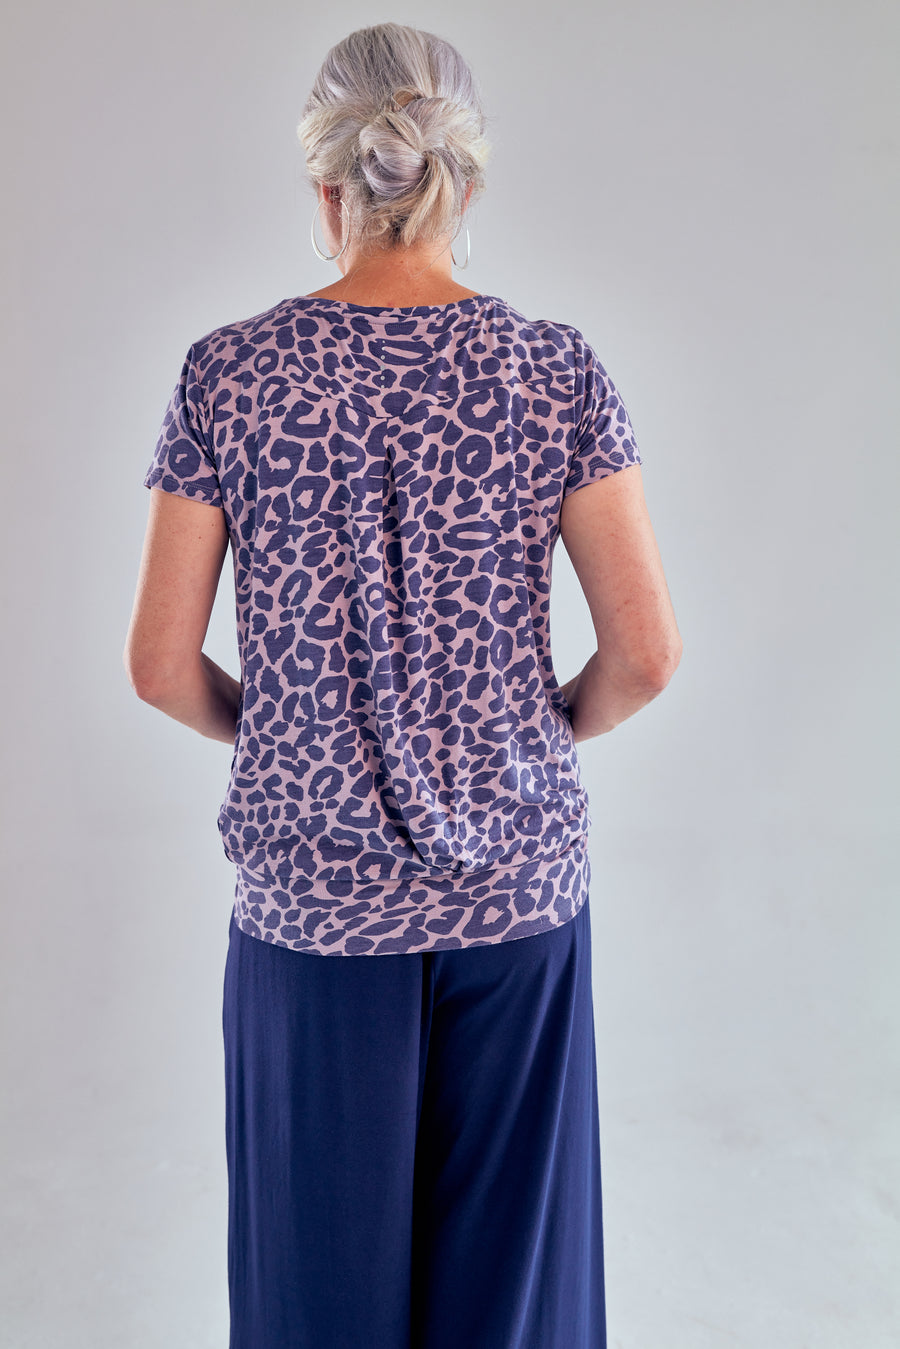 Smooth You Tee - Leopard